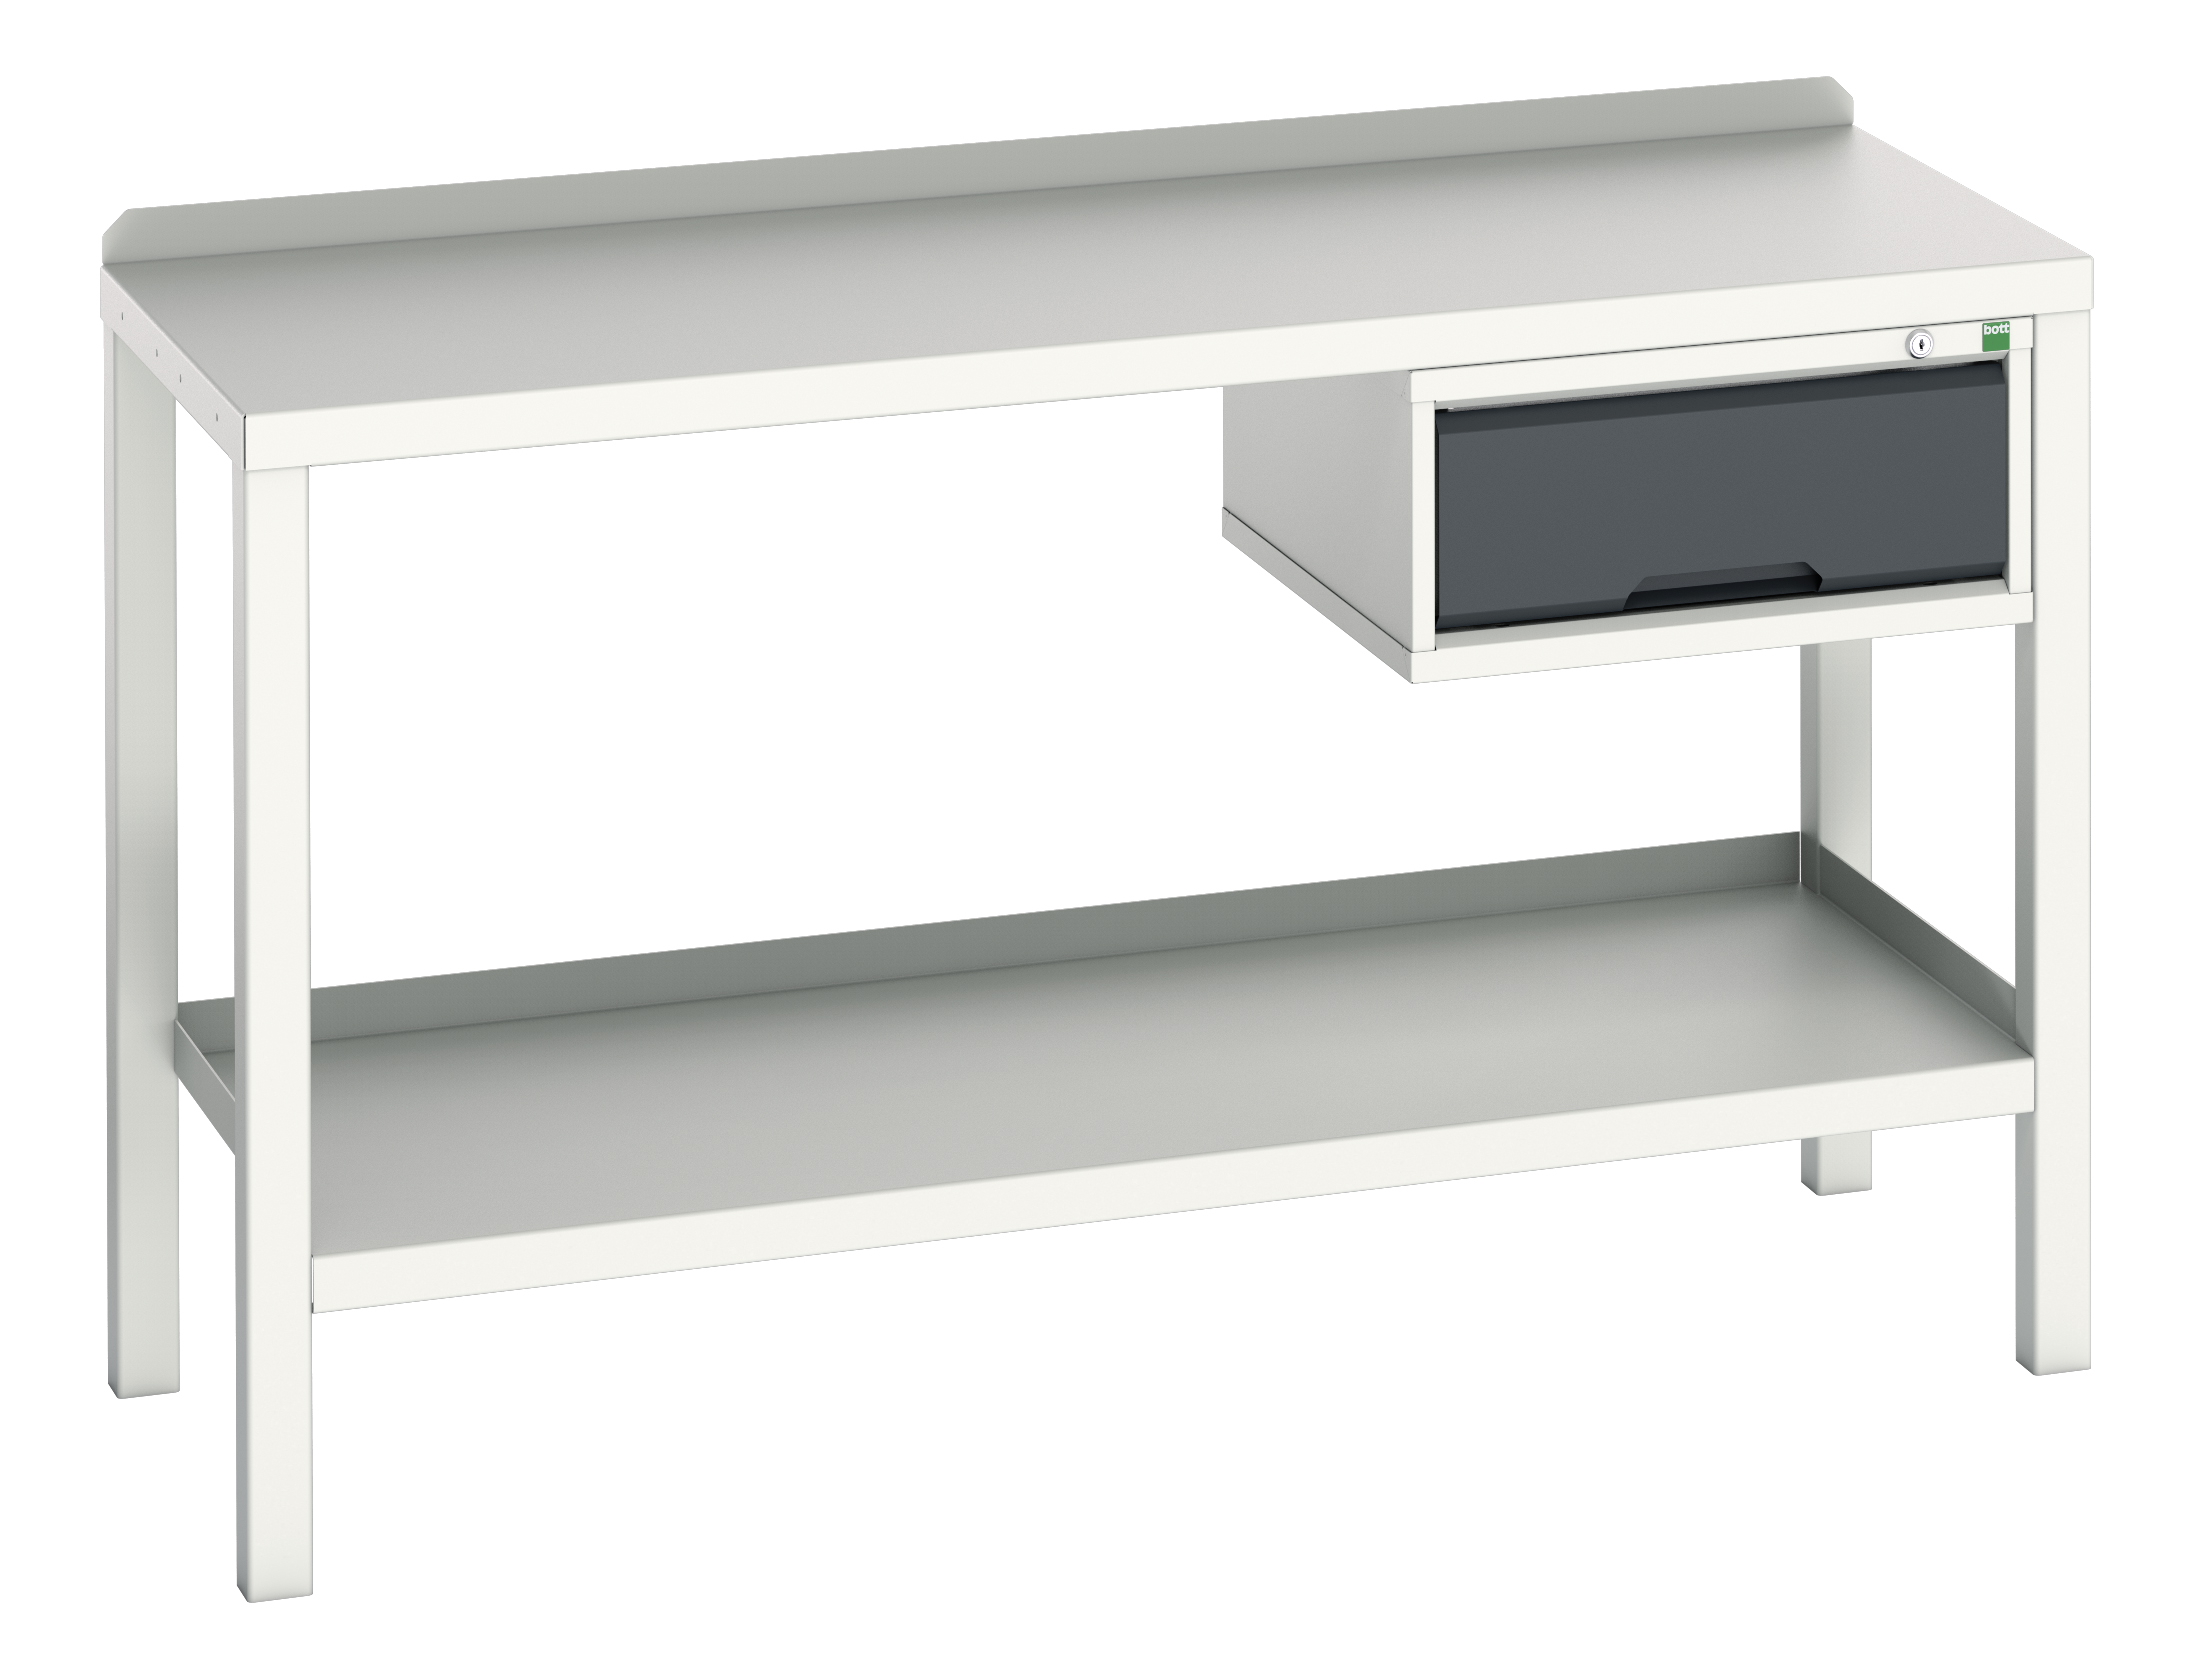 Bott Verso Welded Bench With 1 Drawer Cabinet - 16922604.19